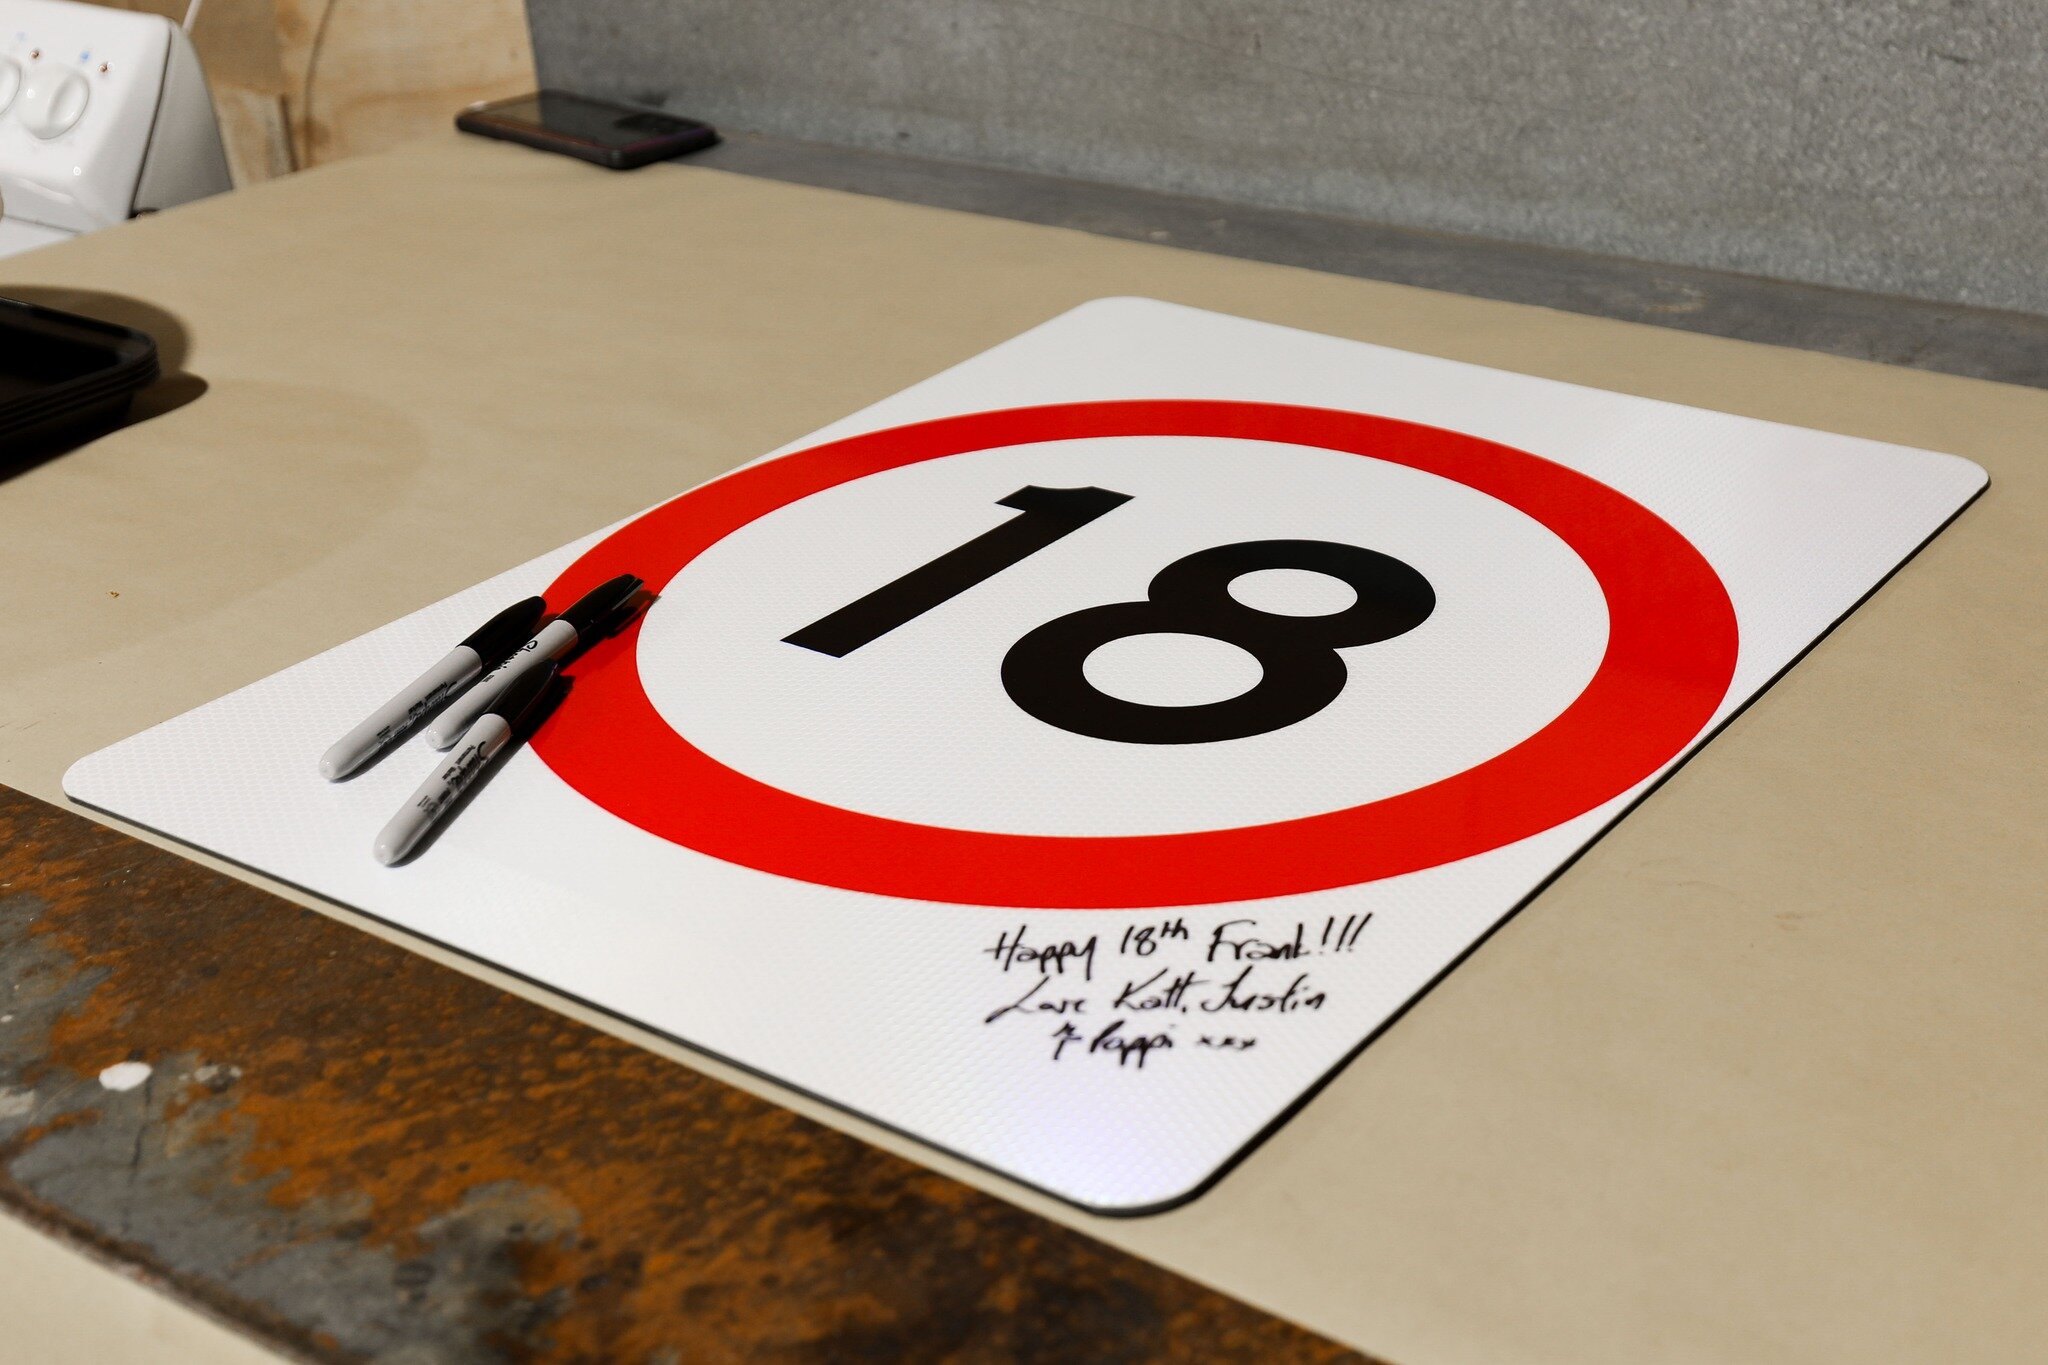 🎂🚀 &quot;Eternal 18&quot; Birthday Card: A Sign of Celebration! 🚦🎉

This isn't just a card; it's a keepsake! 💌

Celebrate the 18th (or any) year in life with our unique 18-speed limit sign birthday card. It's a gift that can be signed by friends